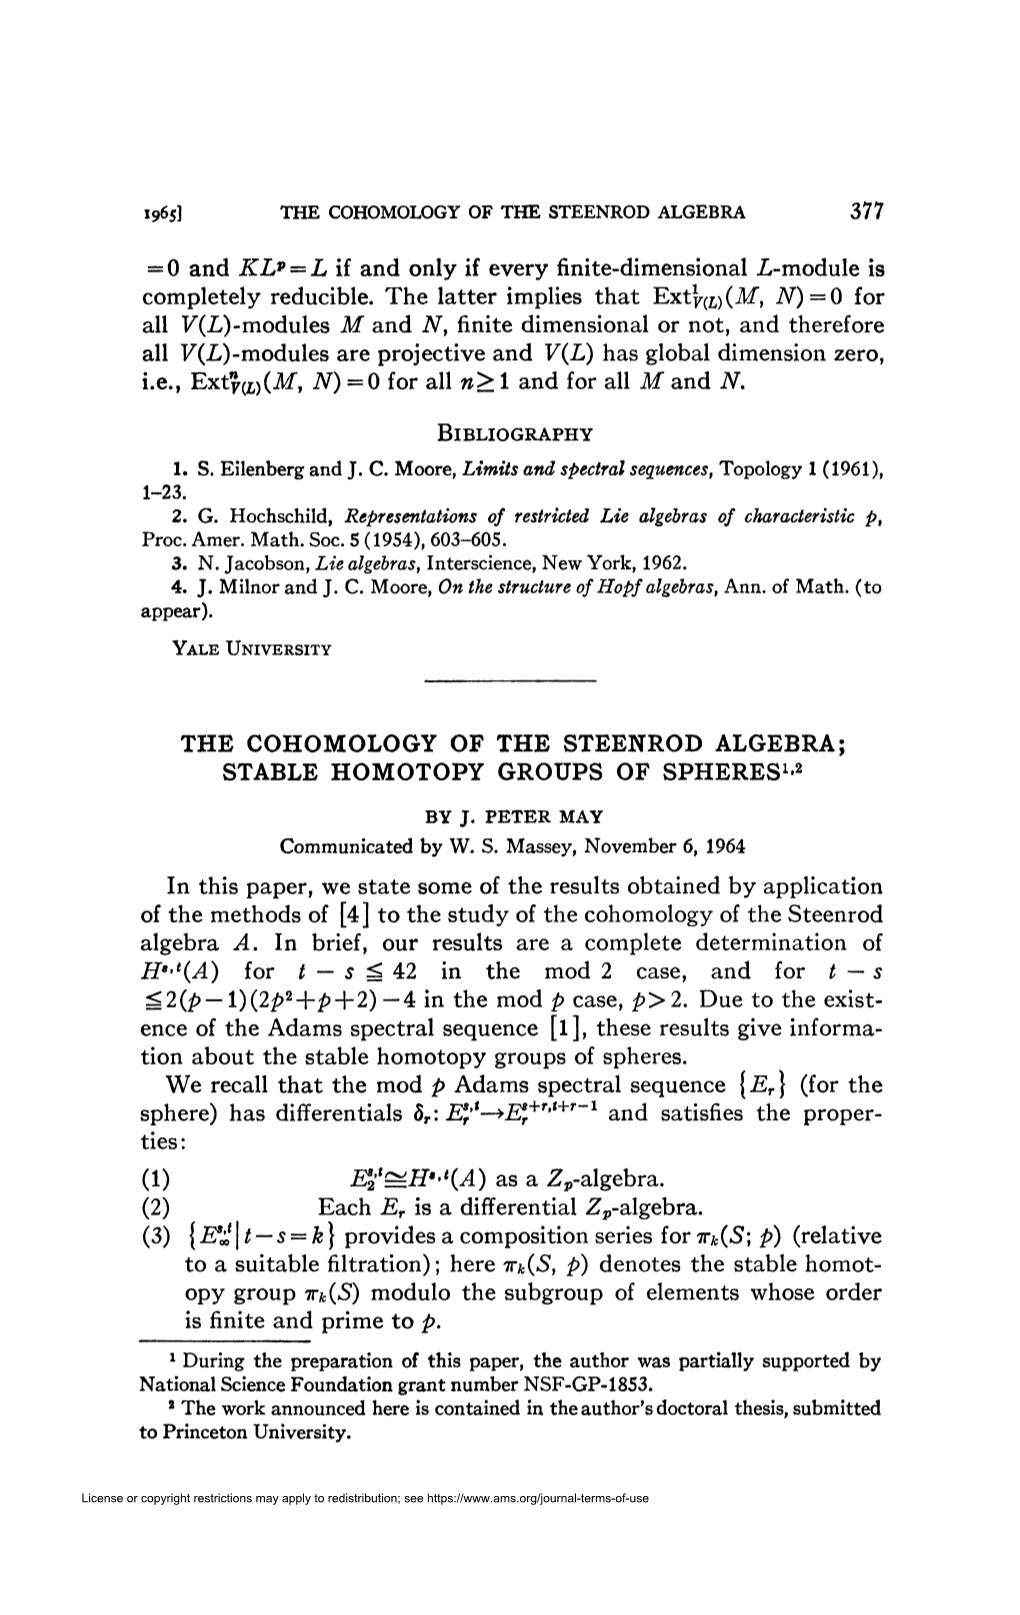 1965] the COHOMOLOGY of the STEENROD ALGEBRA 377 = 0 and KLP = L If and Only If Every Finite-Dimensional L-Module Is Completely